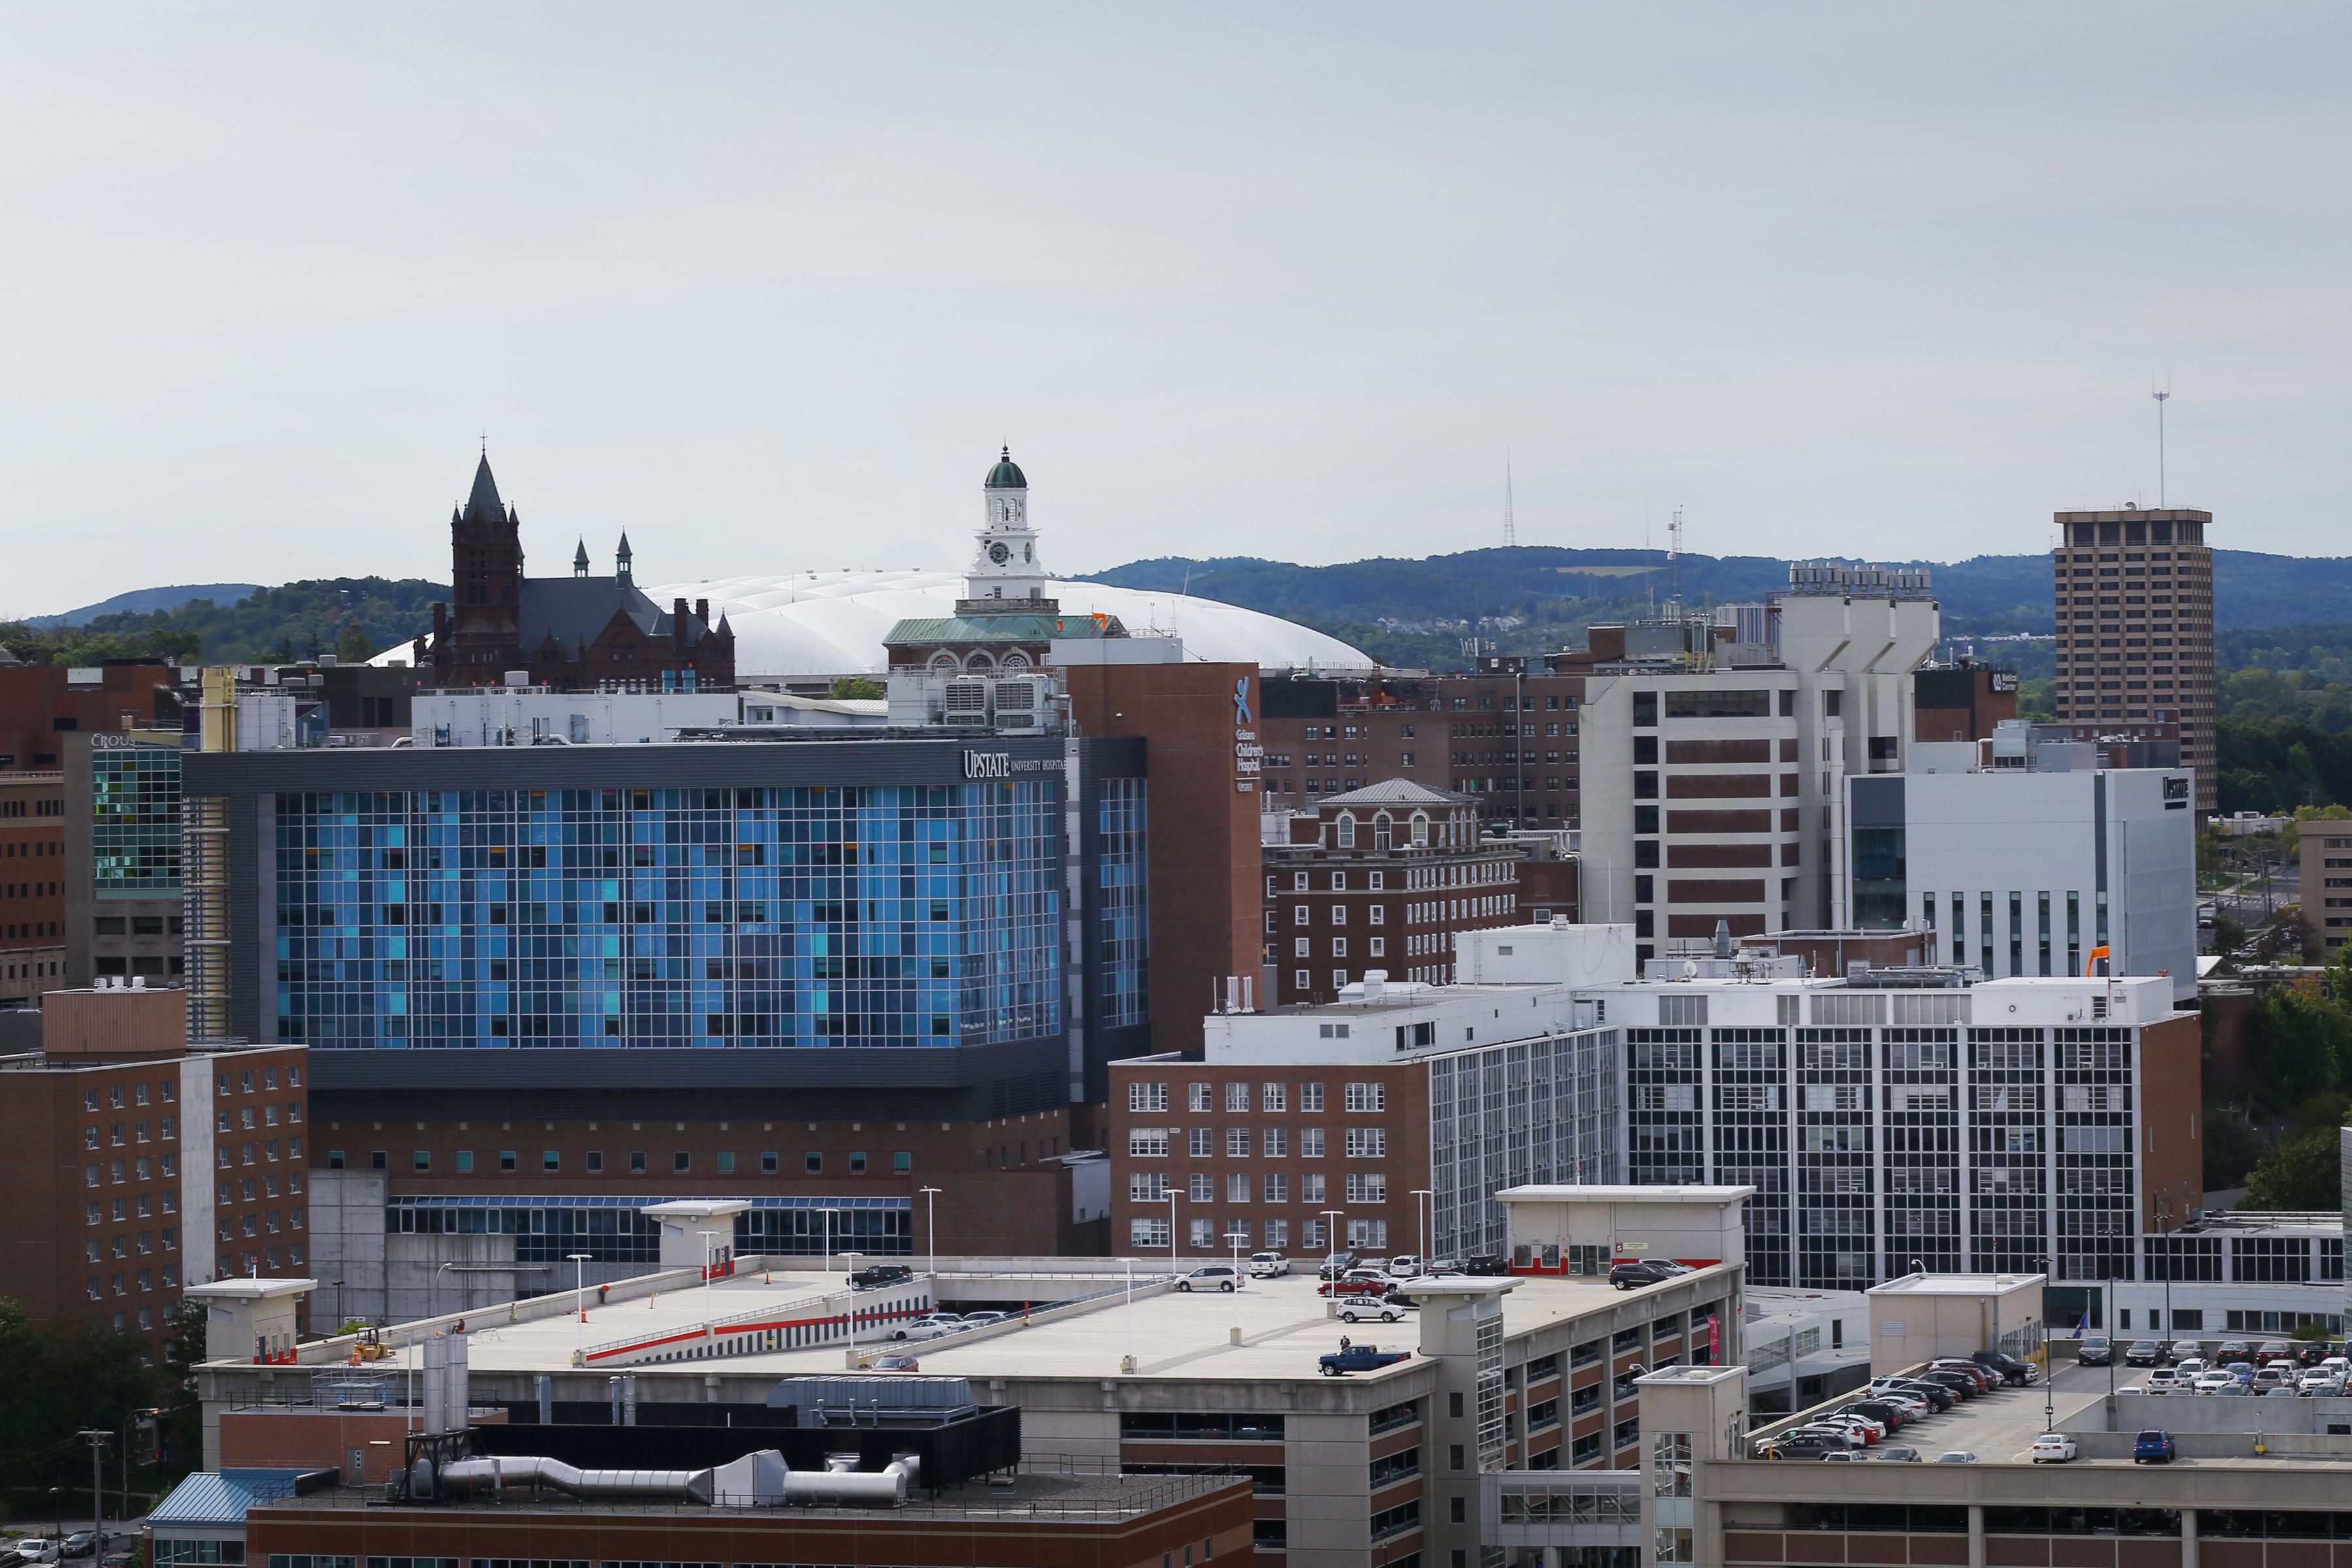 The Crowne Plaza offers a breathtaking view of Syracuse University